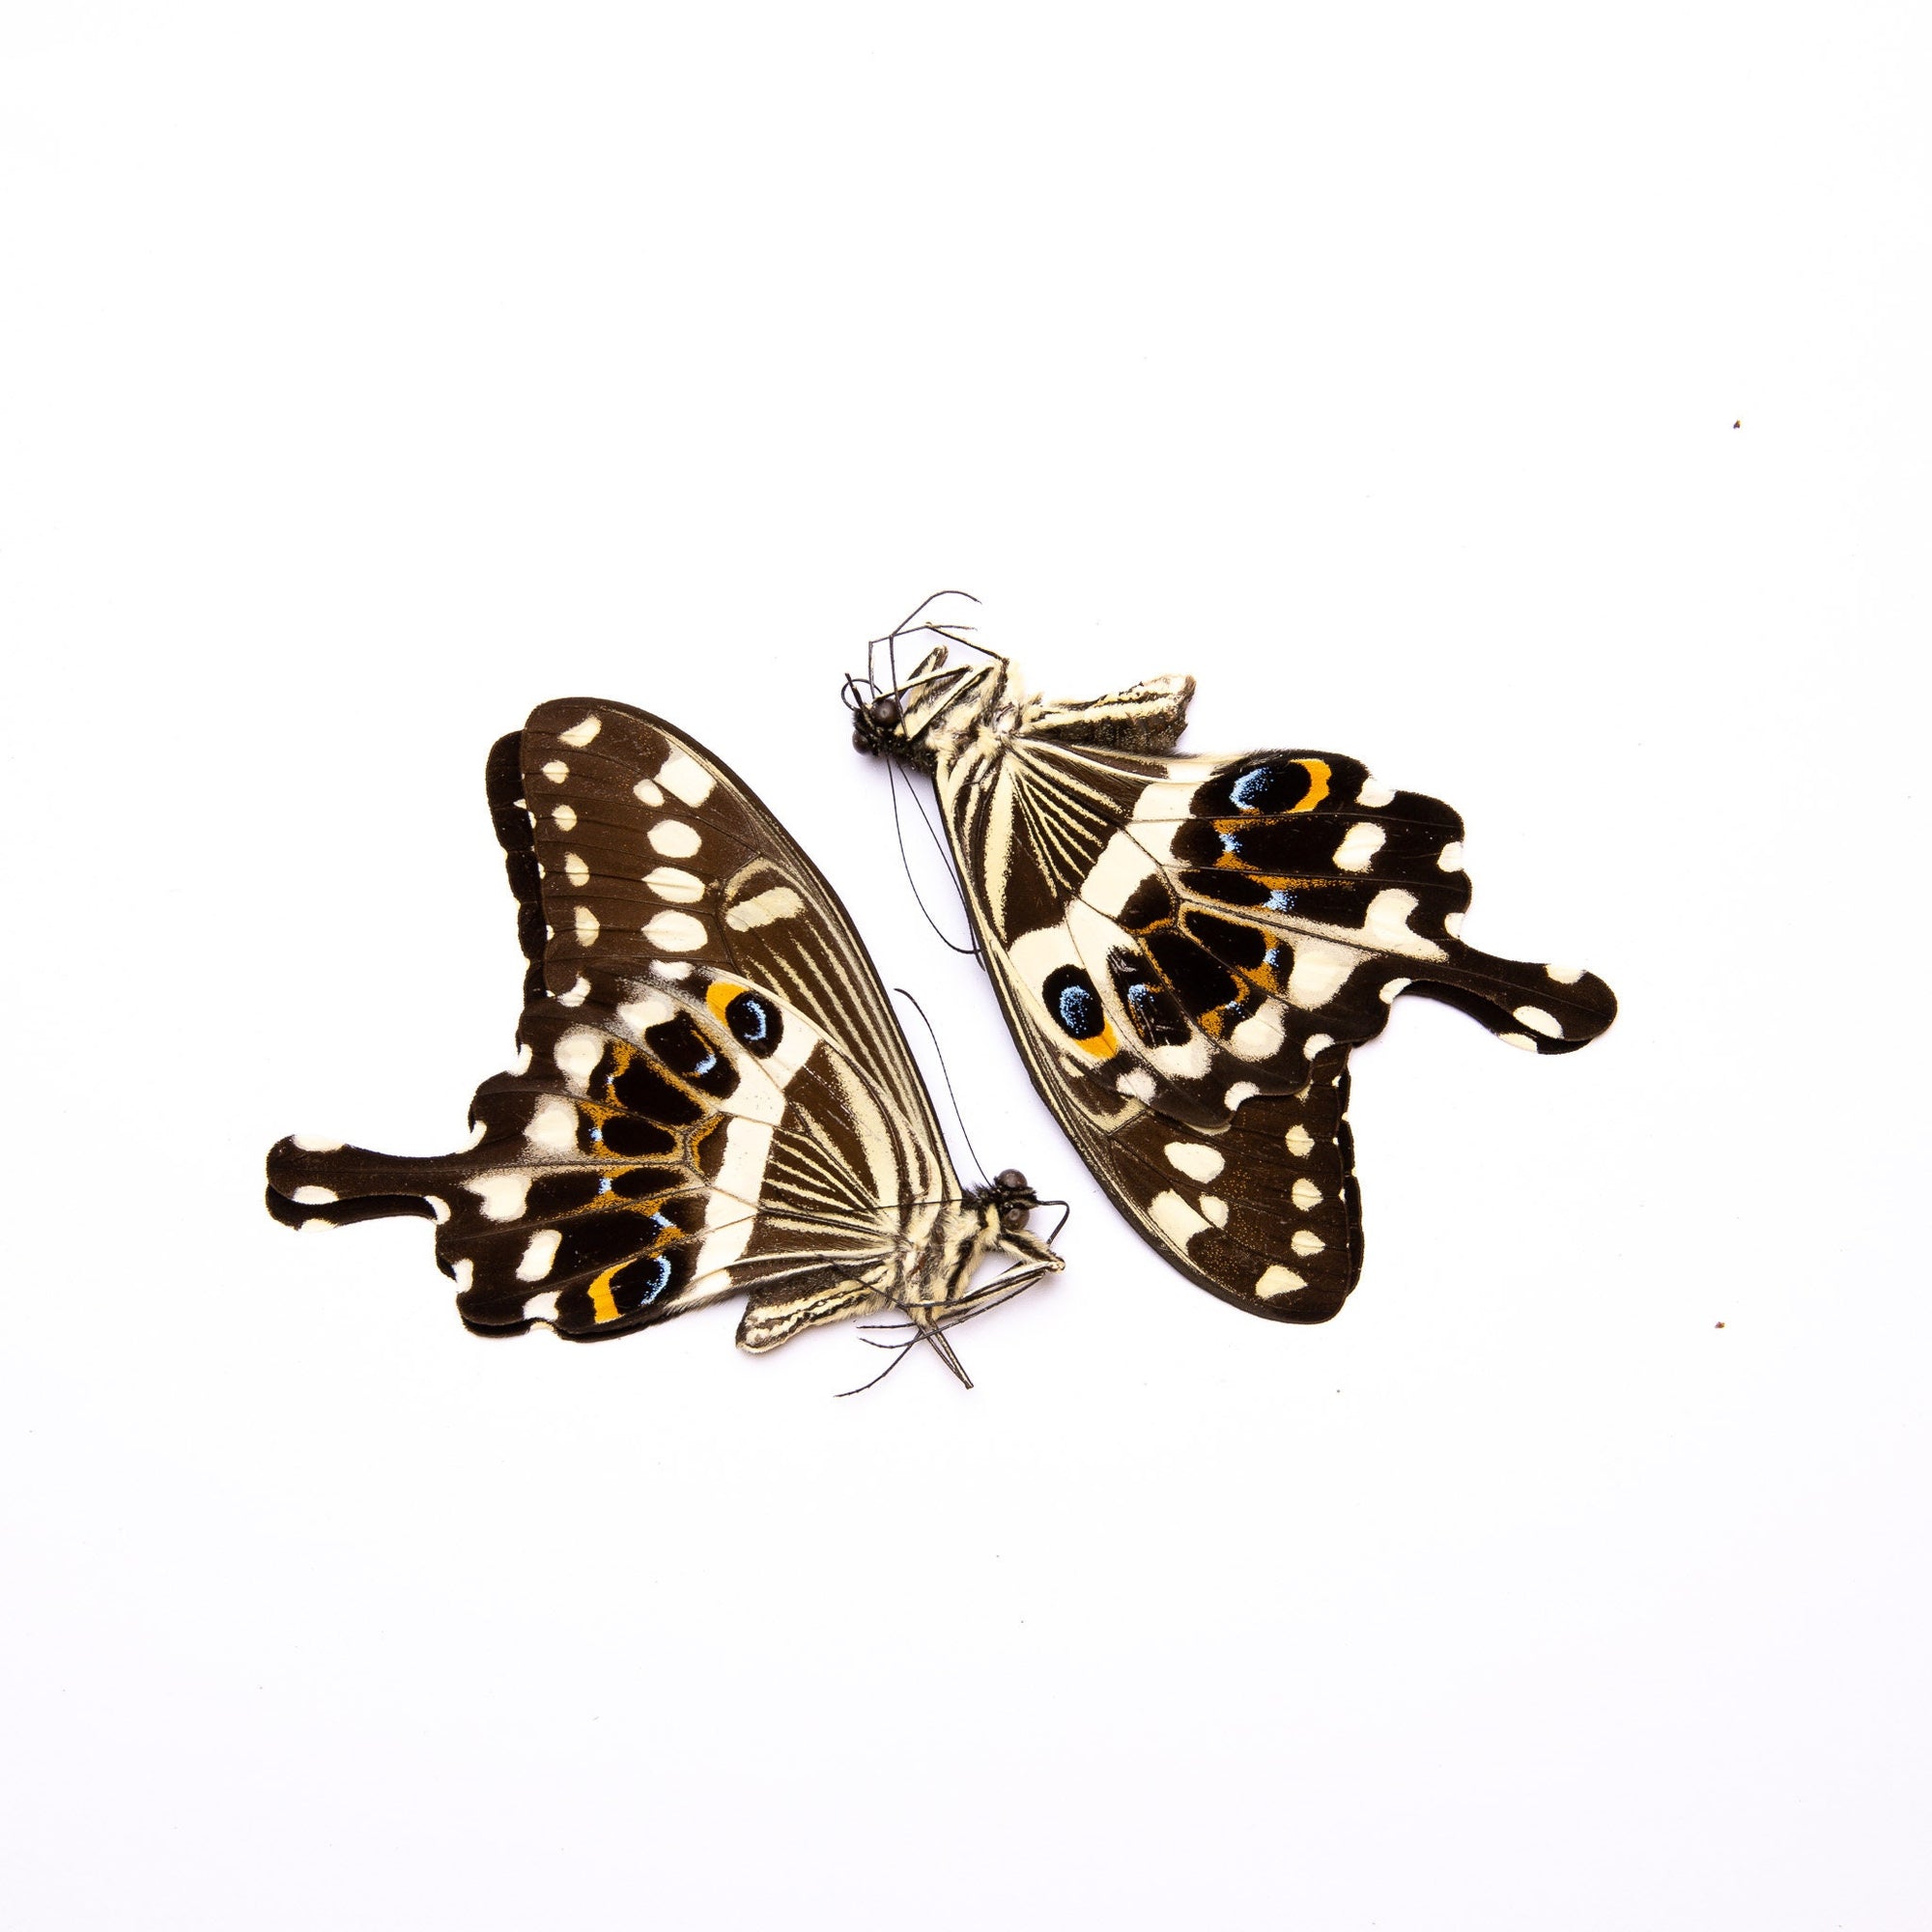 Two (2) Emperor Swallowtail (Papilio lomieri) A1 Unmounted Real Butterflies